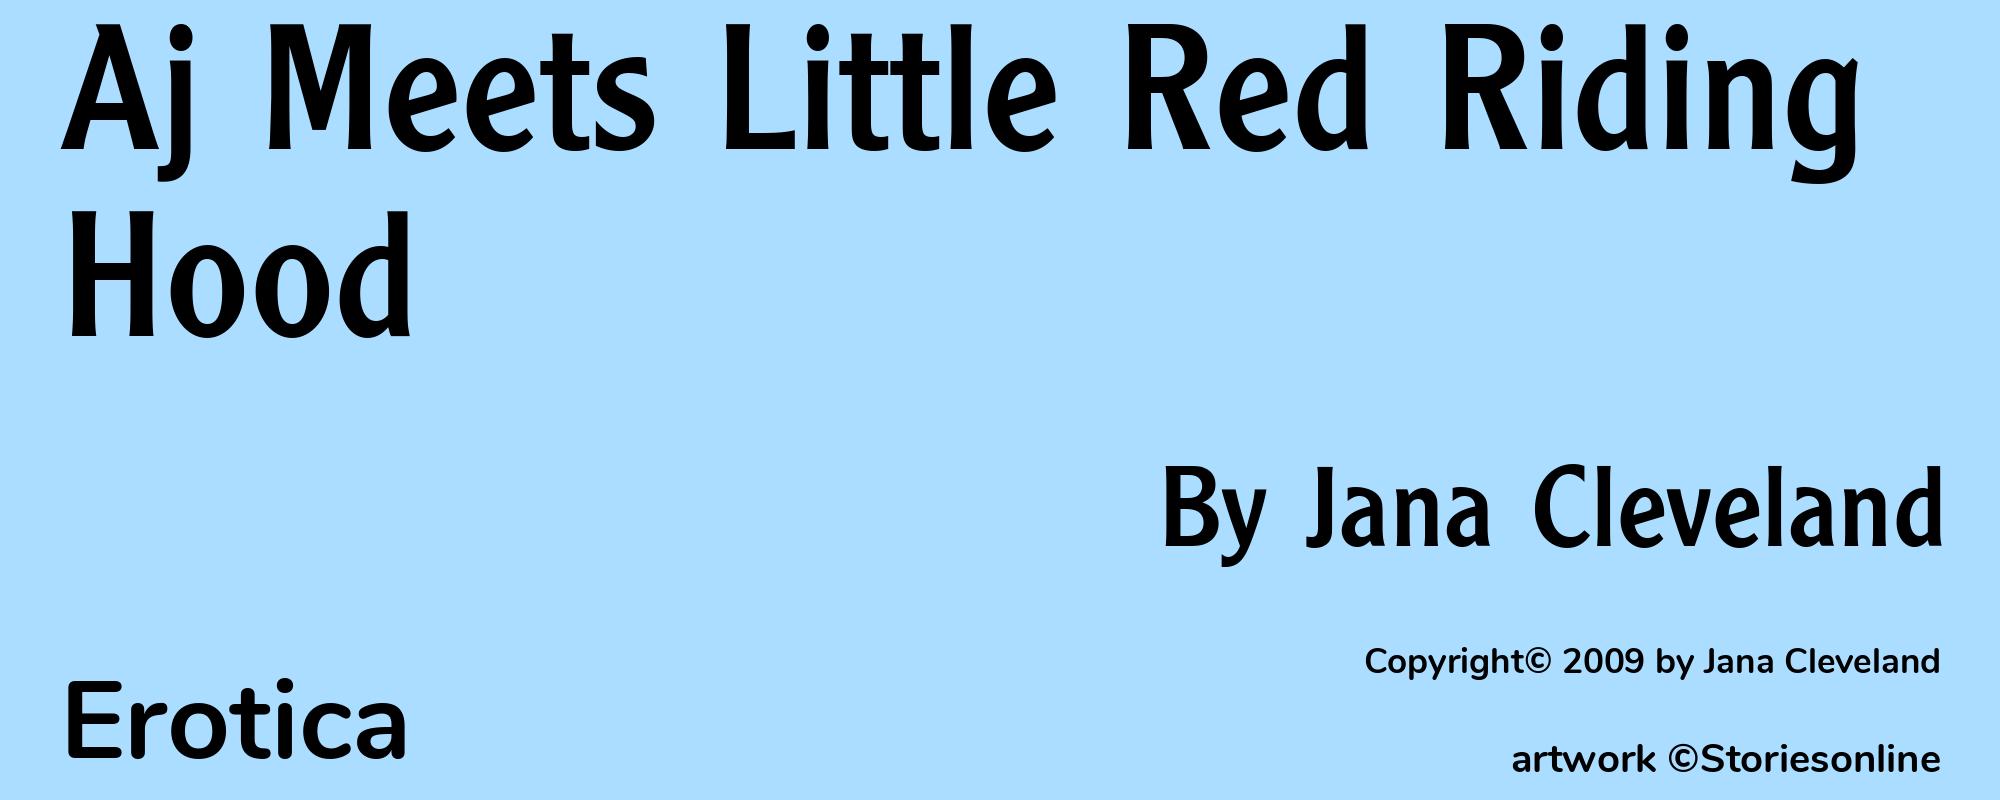 Aj Meets Little Red Riding Hood - Cover